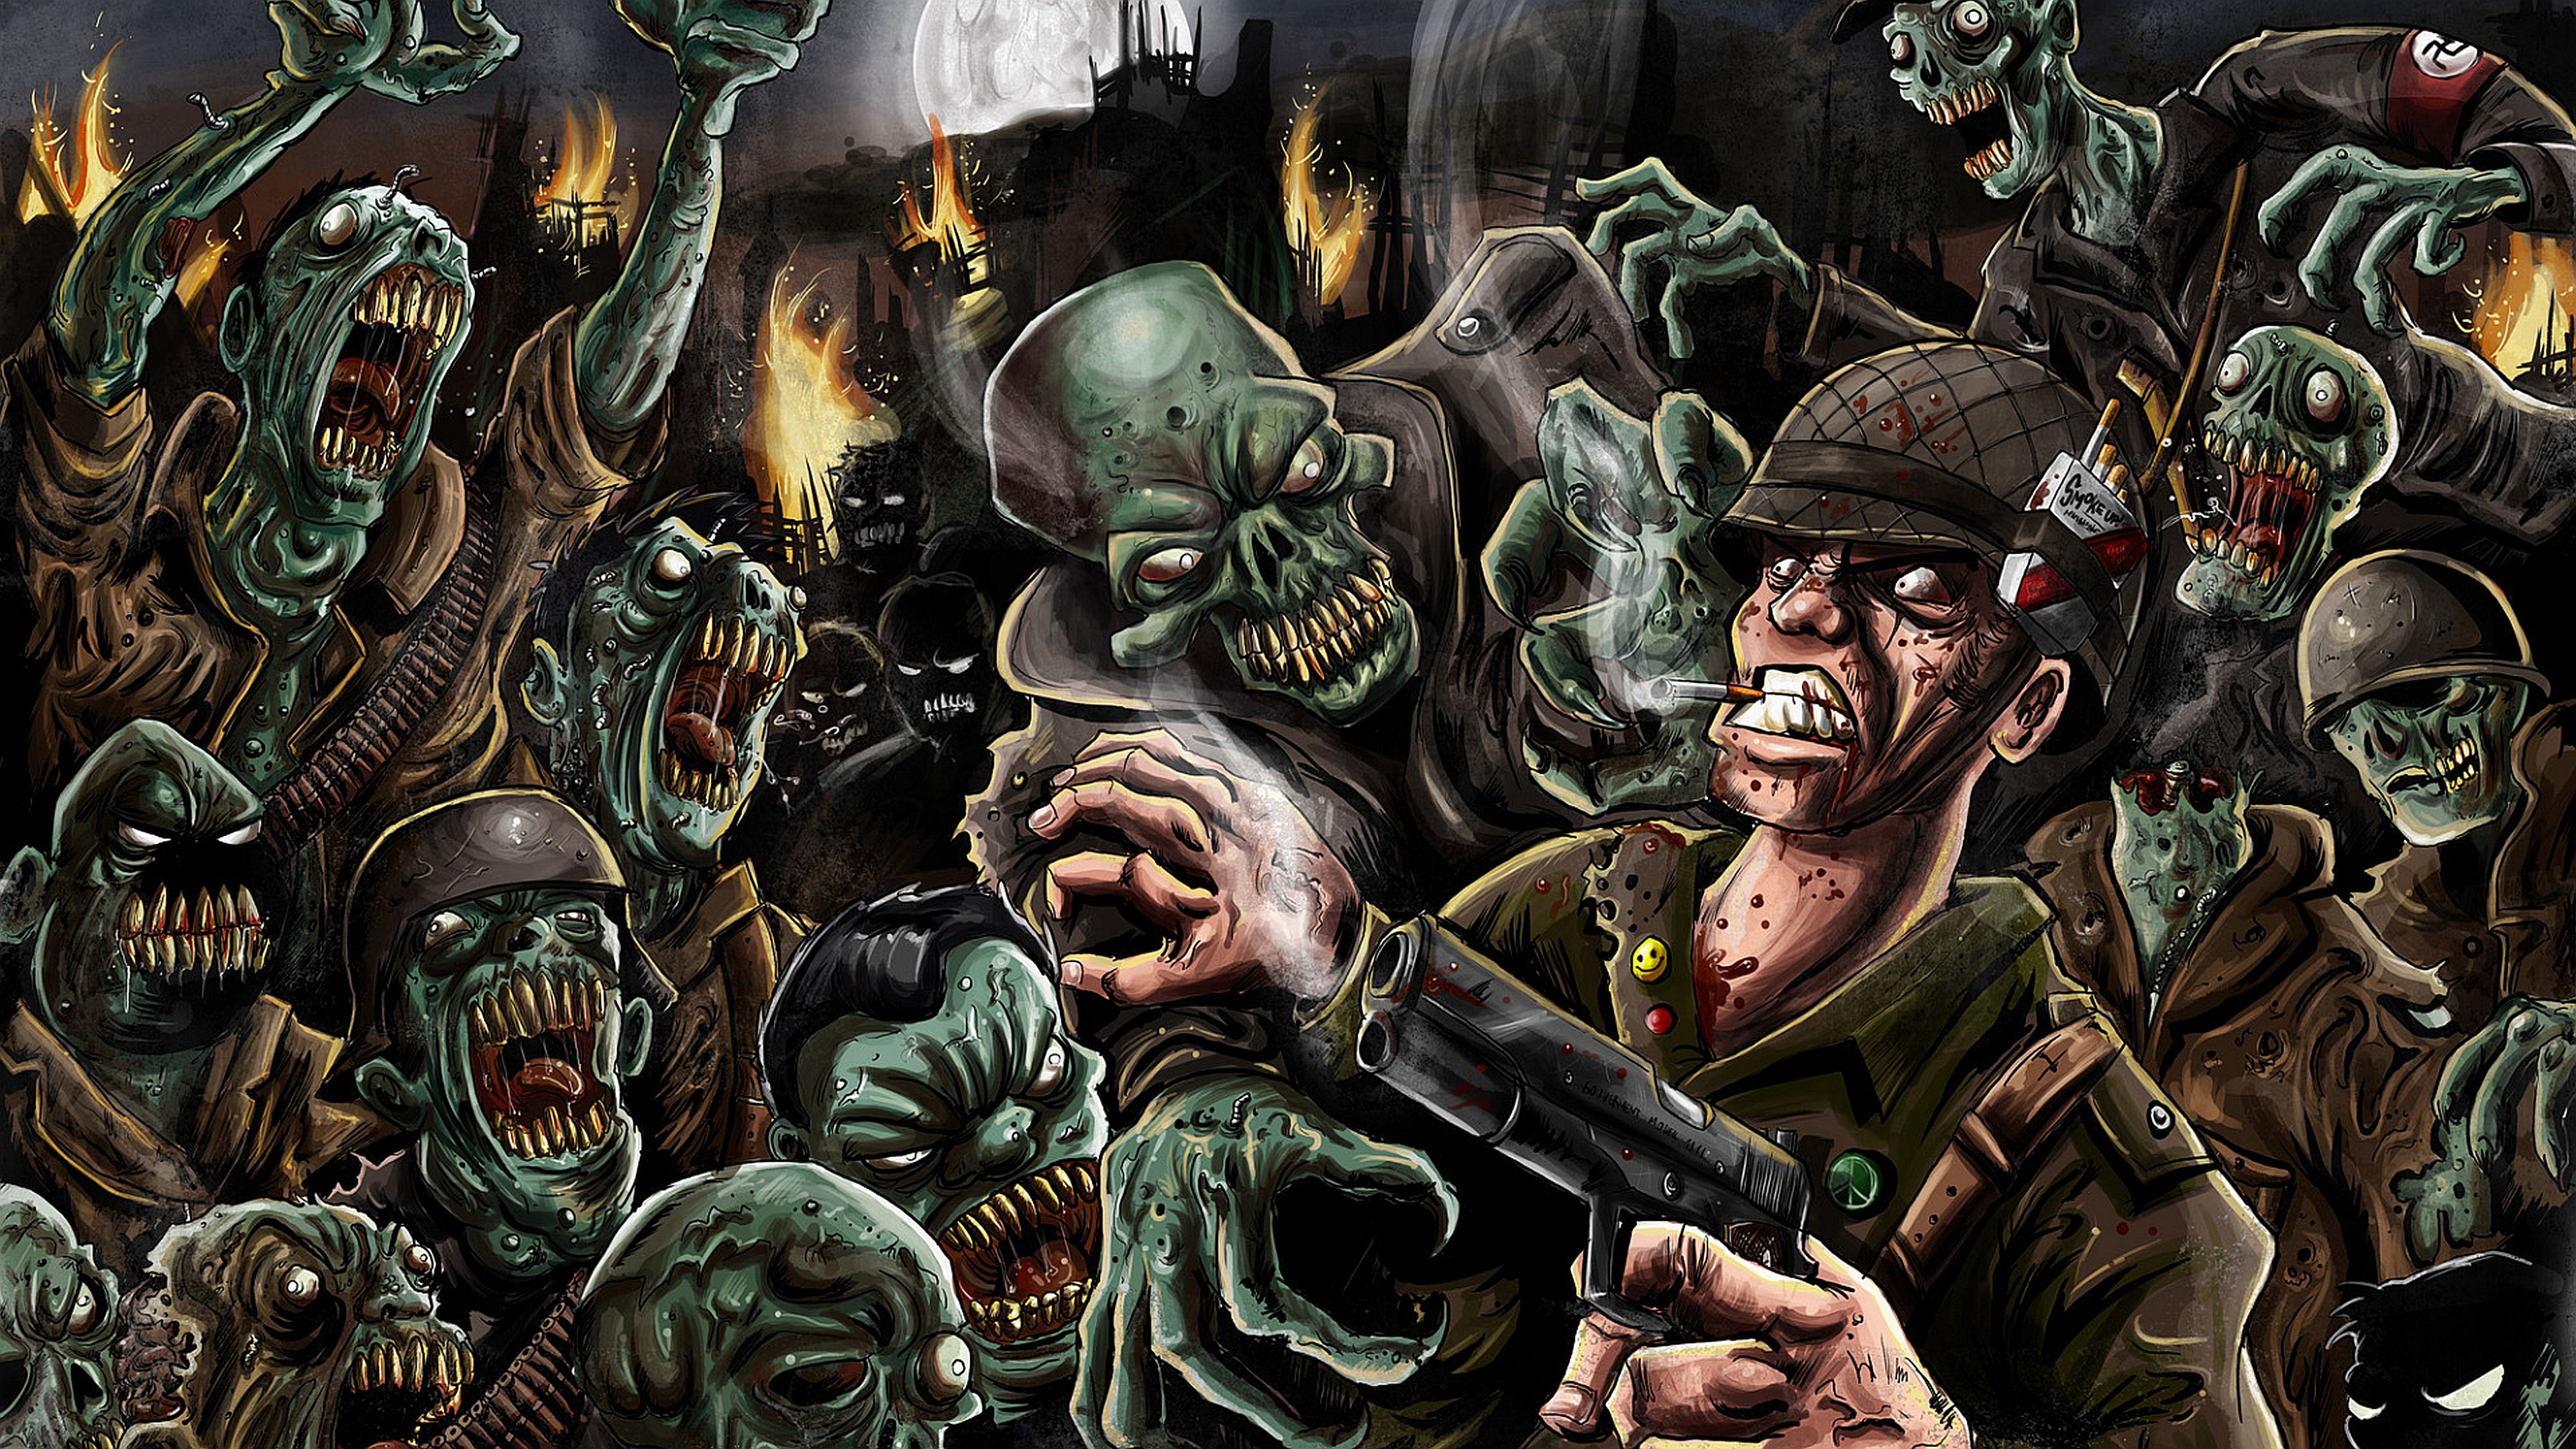 Free download soldier fighting nazi zombies cartoon wallpaper from Zombie wallpaper [3840x2160] for your Desktop, Mobile & Tablet. Explore Nazi Zombie Wallpaper. Zombie Desktop Wallpaper, COD Zombies Wallpaper, Nazi Wallpaper HD